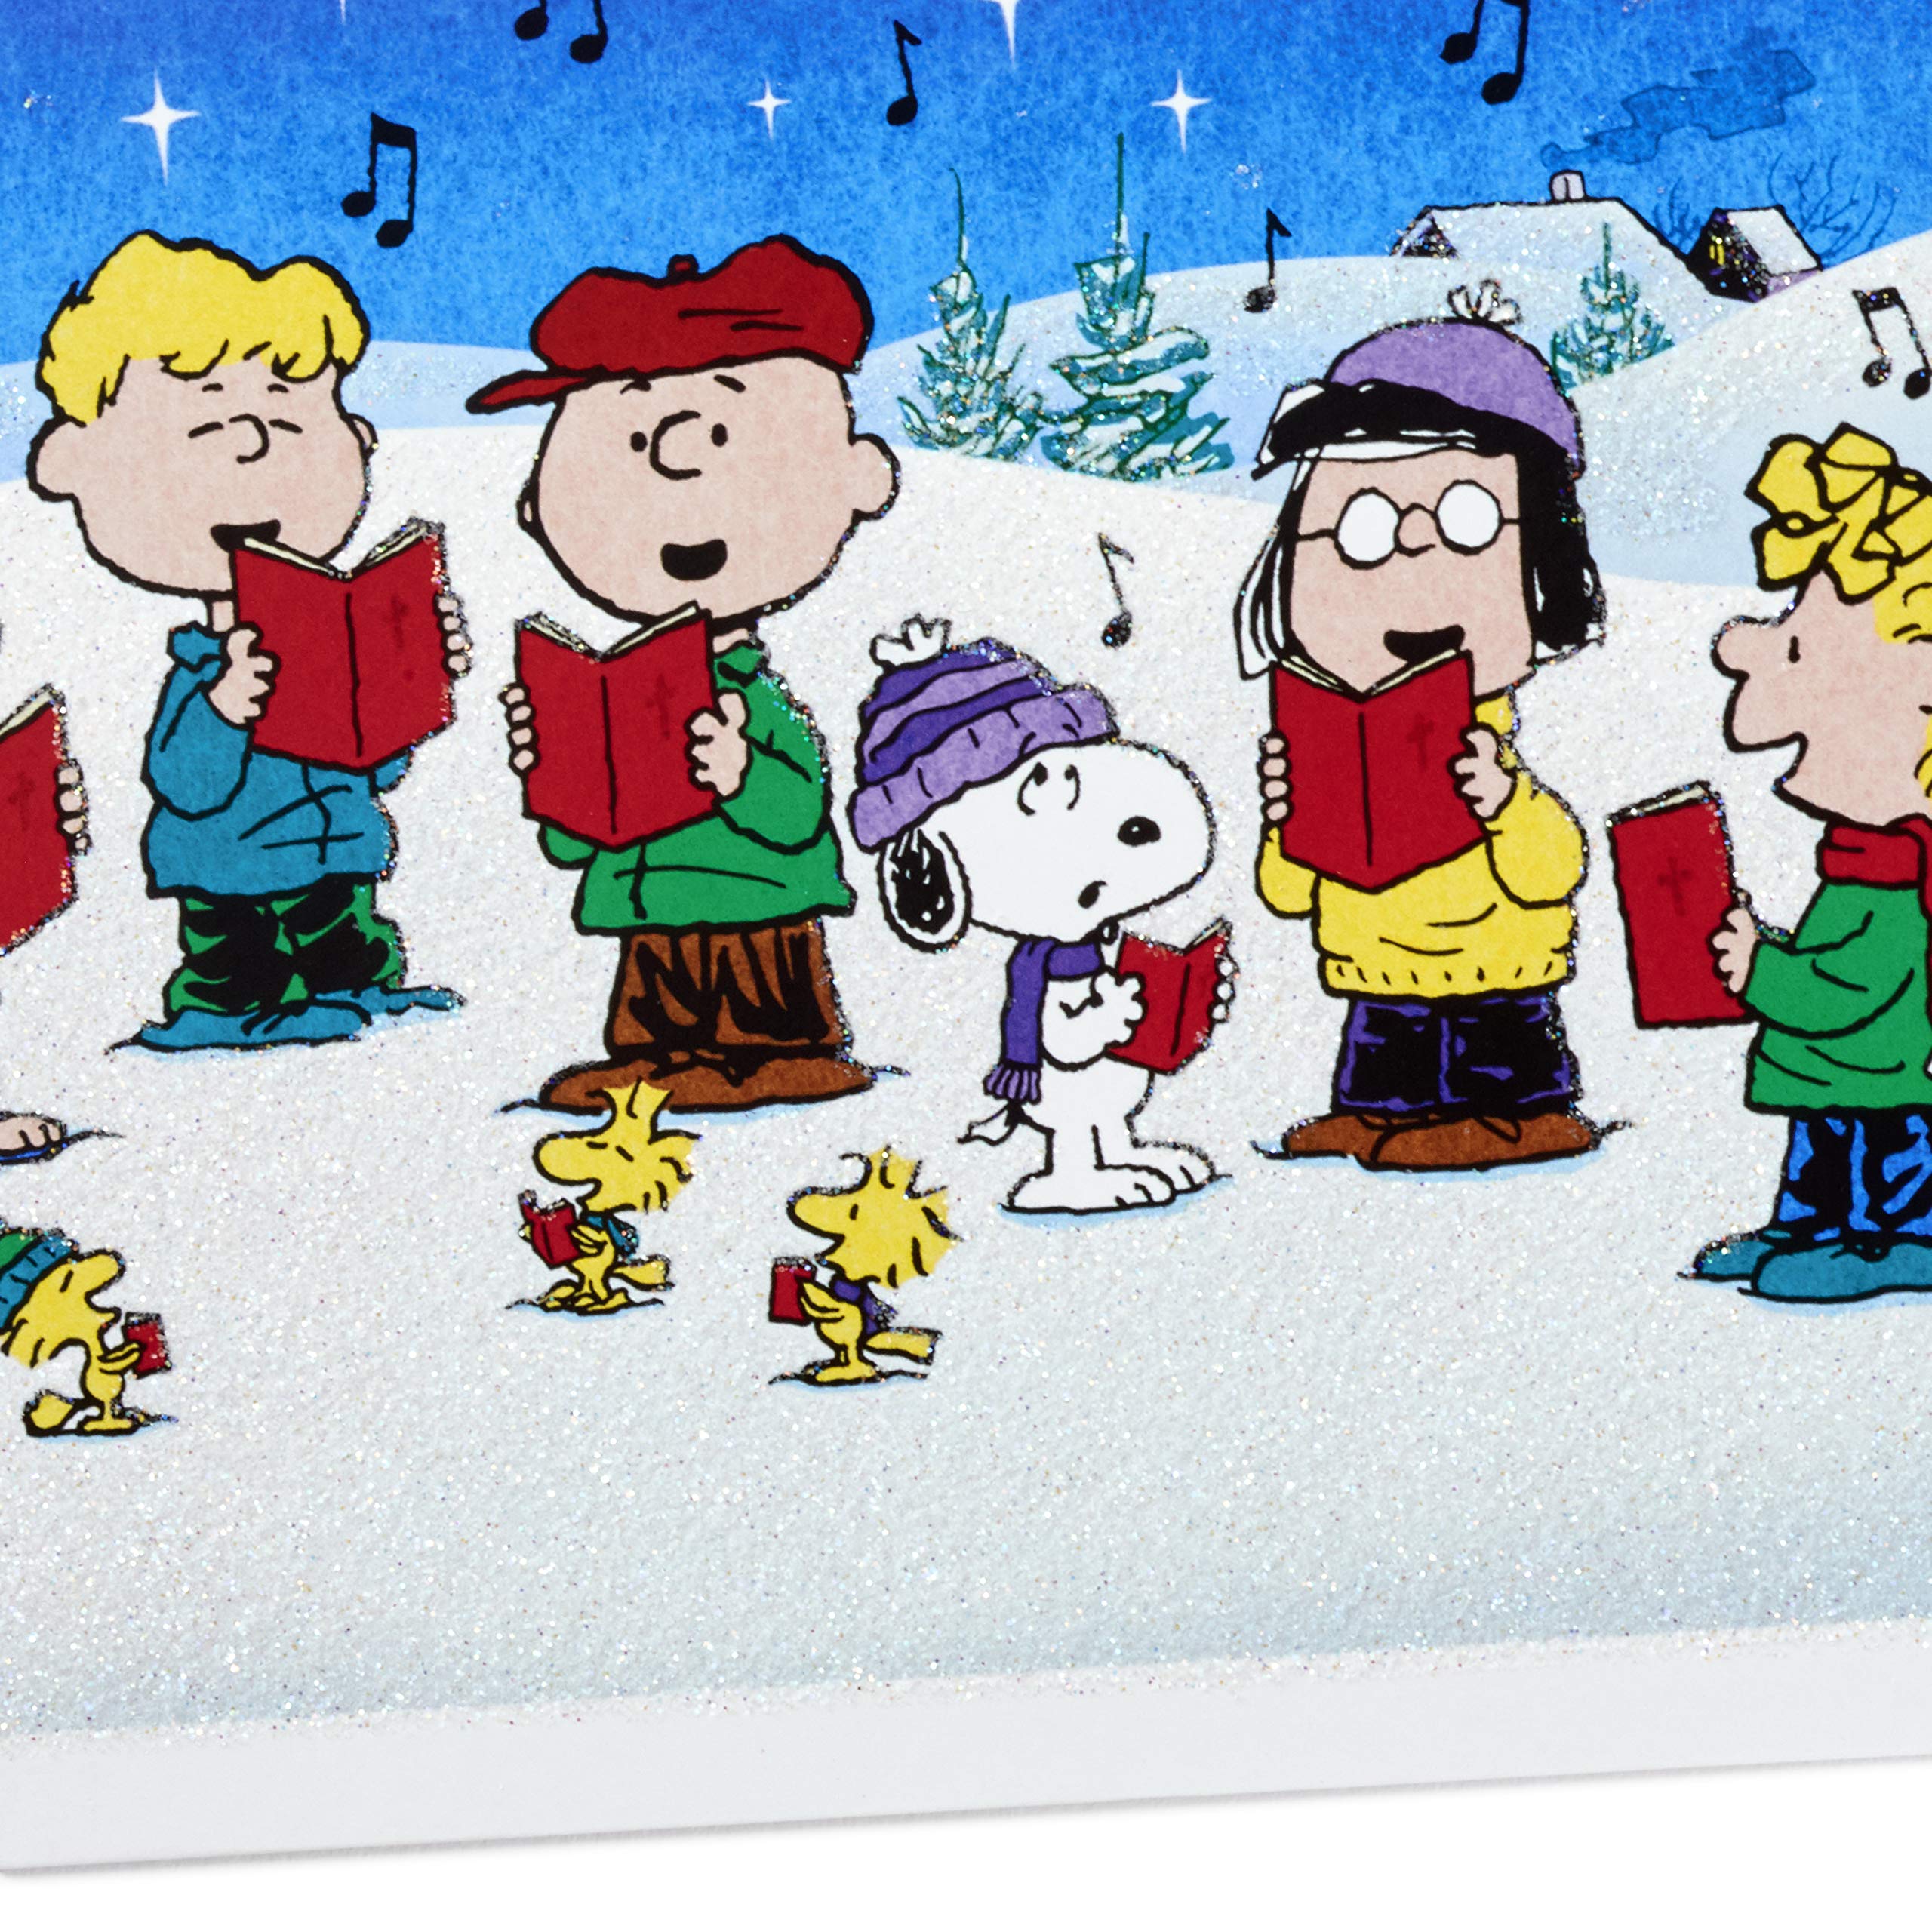 Hallmark Boxed Christmas Cards, Peanuts Gang (40 Cards with Envelopes)